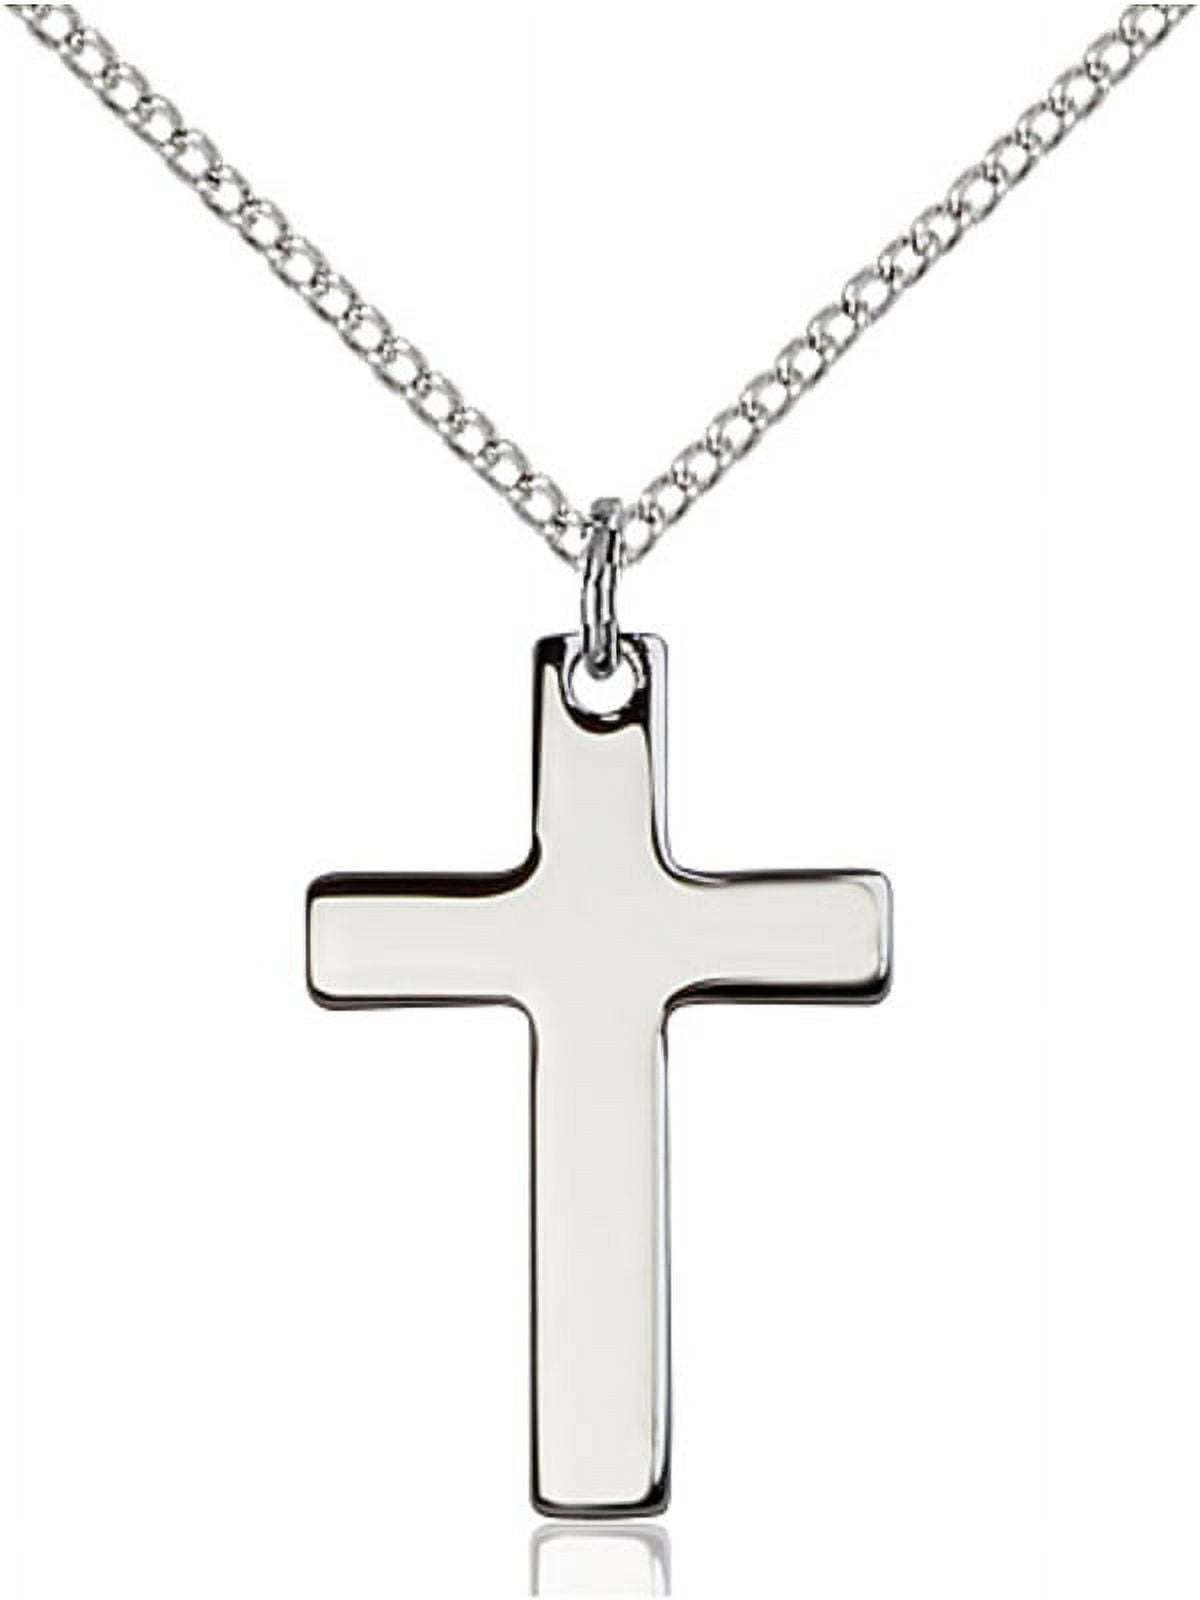 Sterling Silver Cross Pendant 7/8 x 1/2 inches with Sterling Silver Lite  Curb Chain